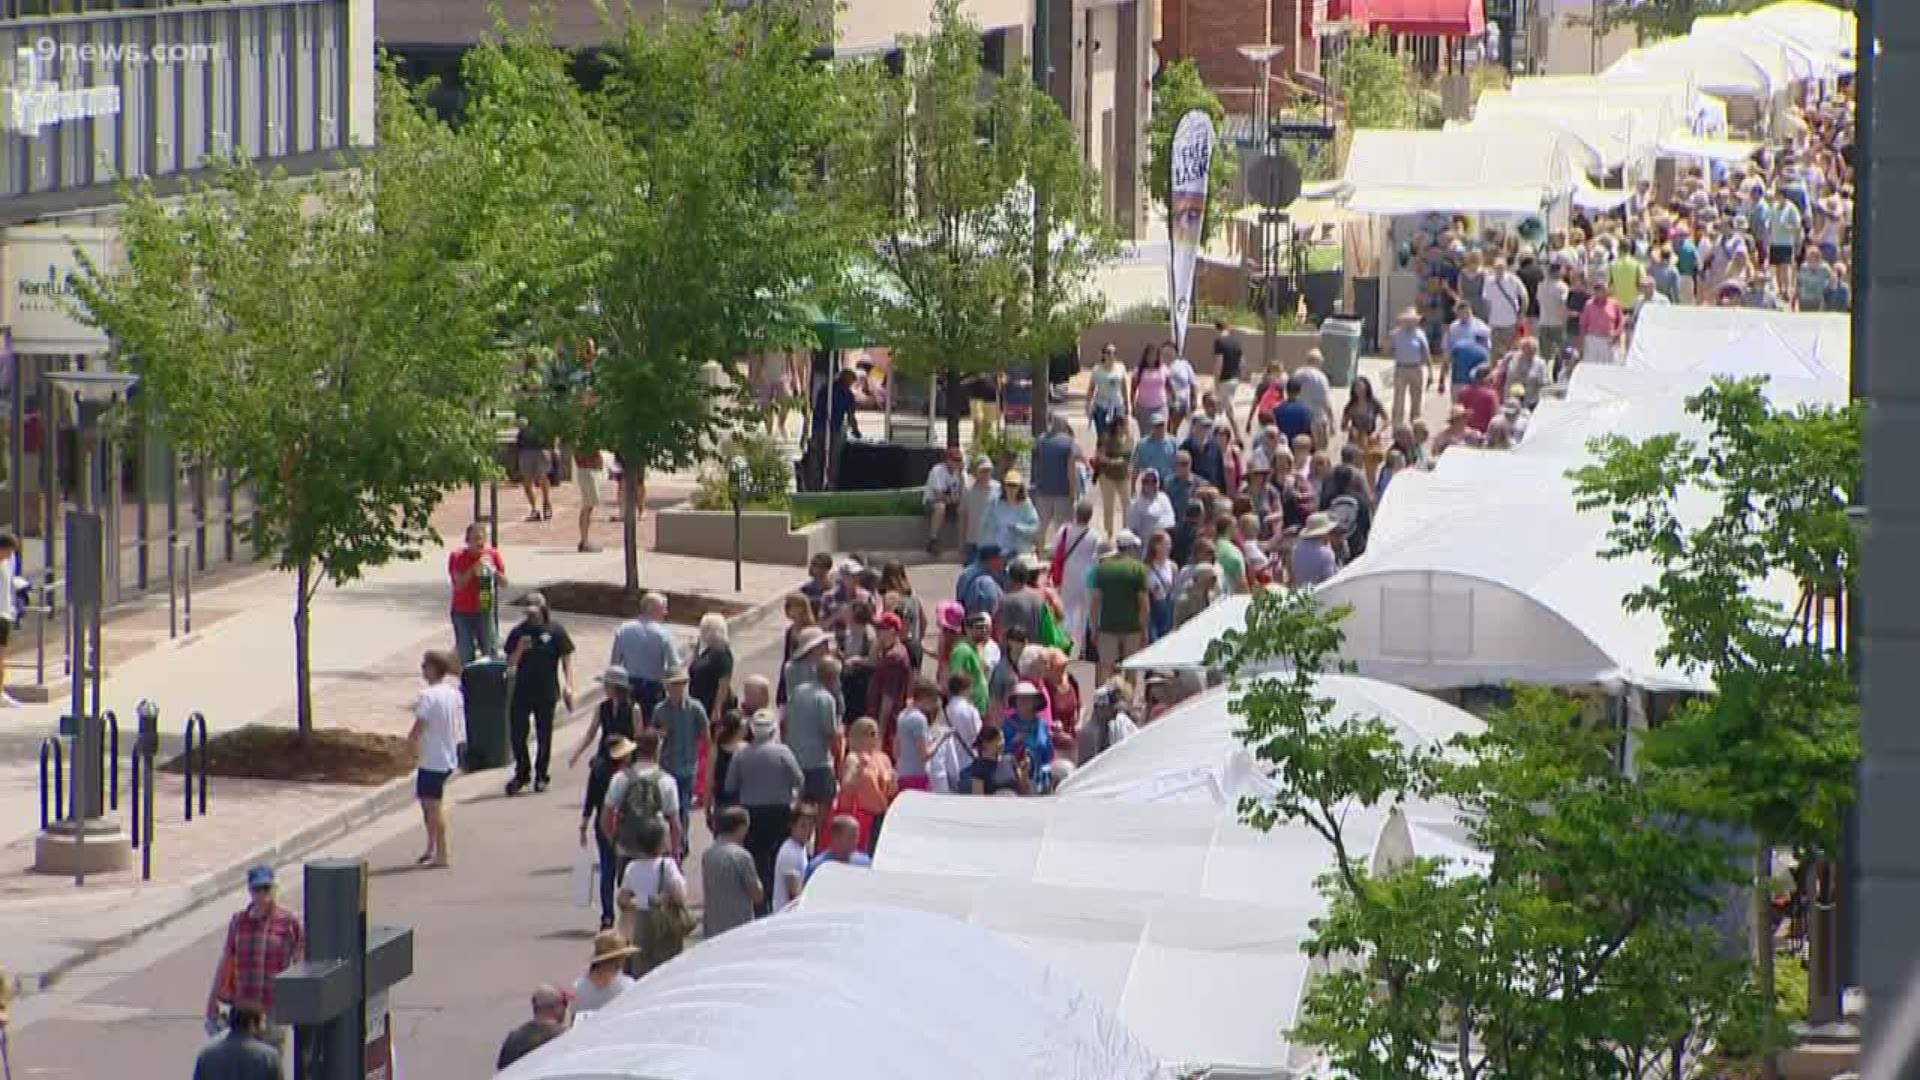 The 29th annual Cherry Creek Arts Festival takes place July 5 to July 7 with free admission and parking.